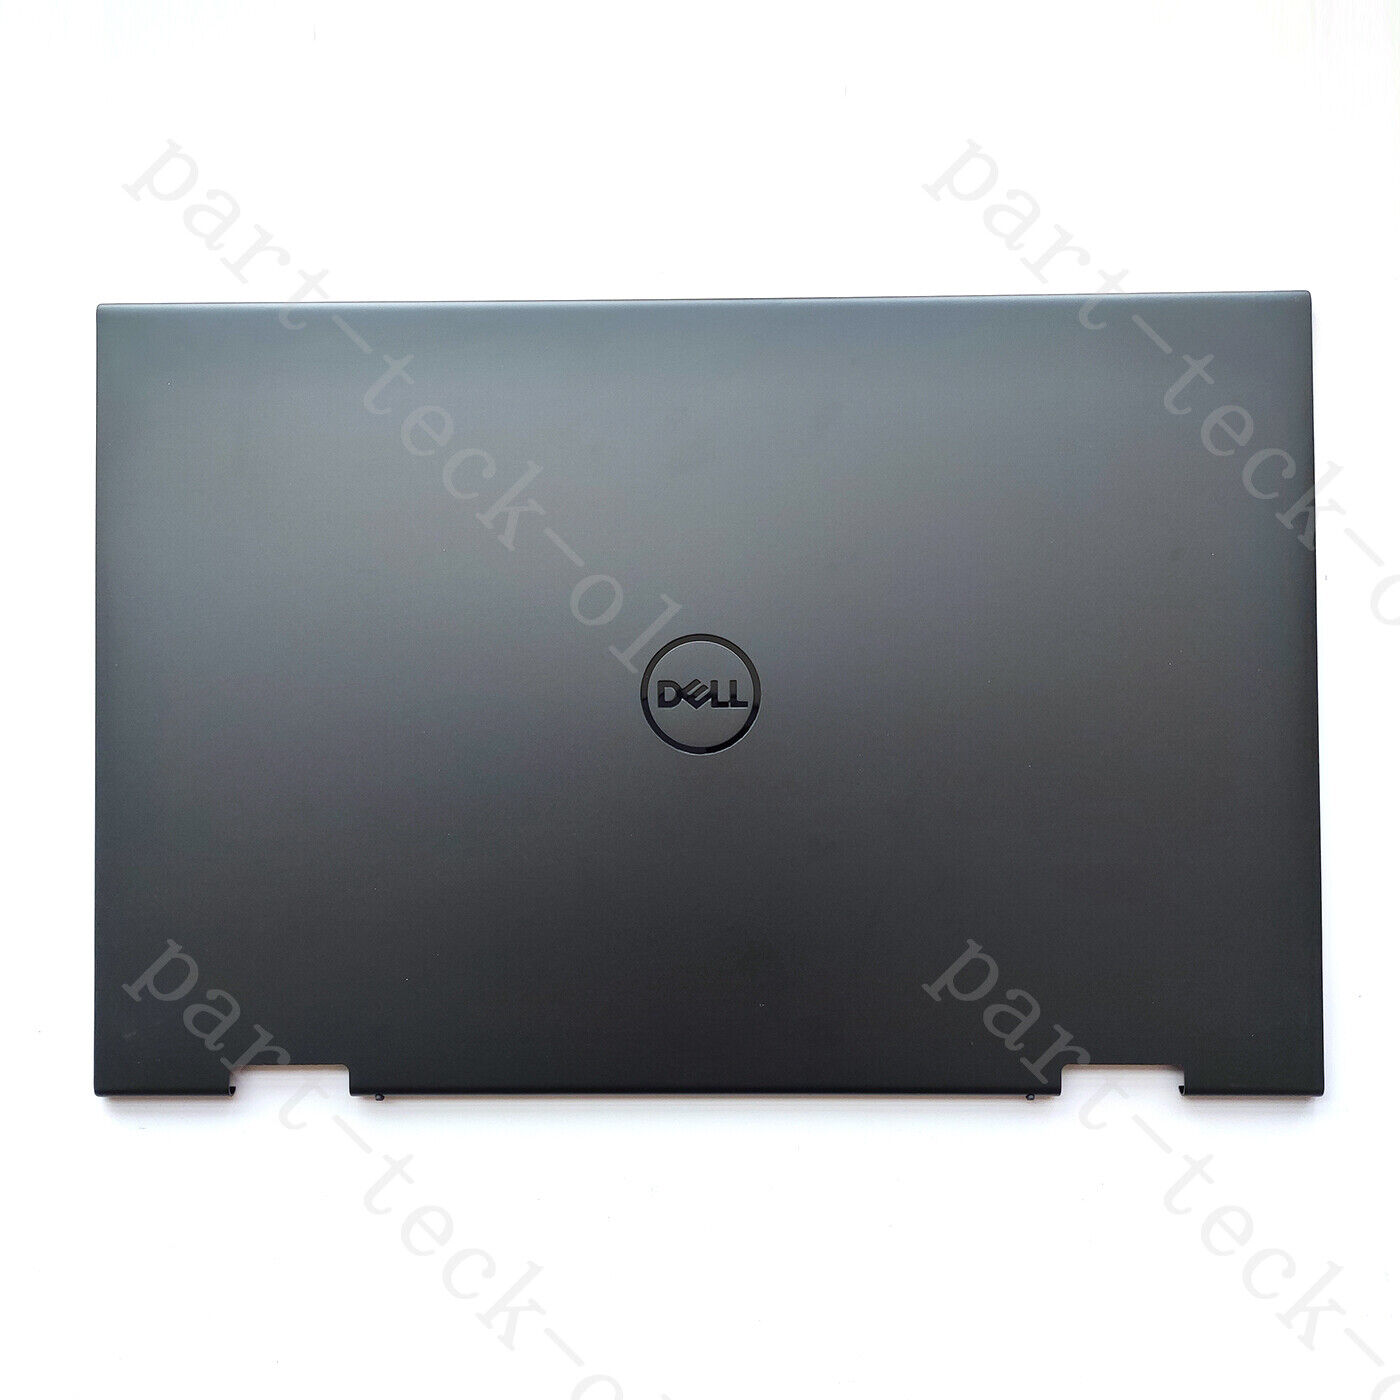 New LCD Back Cover /Hinge For Dell Inspiron 5410 7415 2-in-1 0GWRR6 Silver/Blue